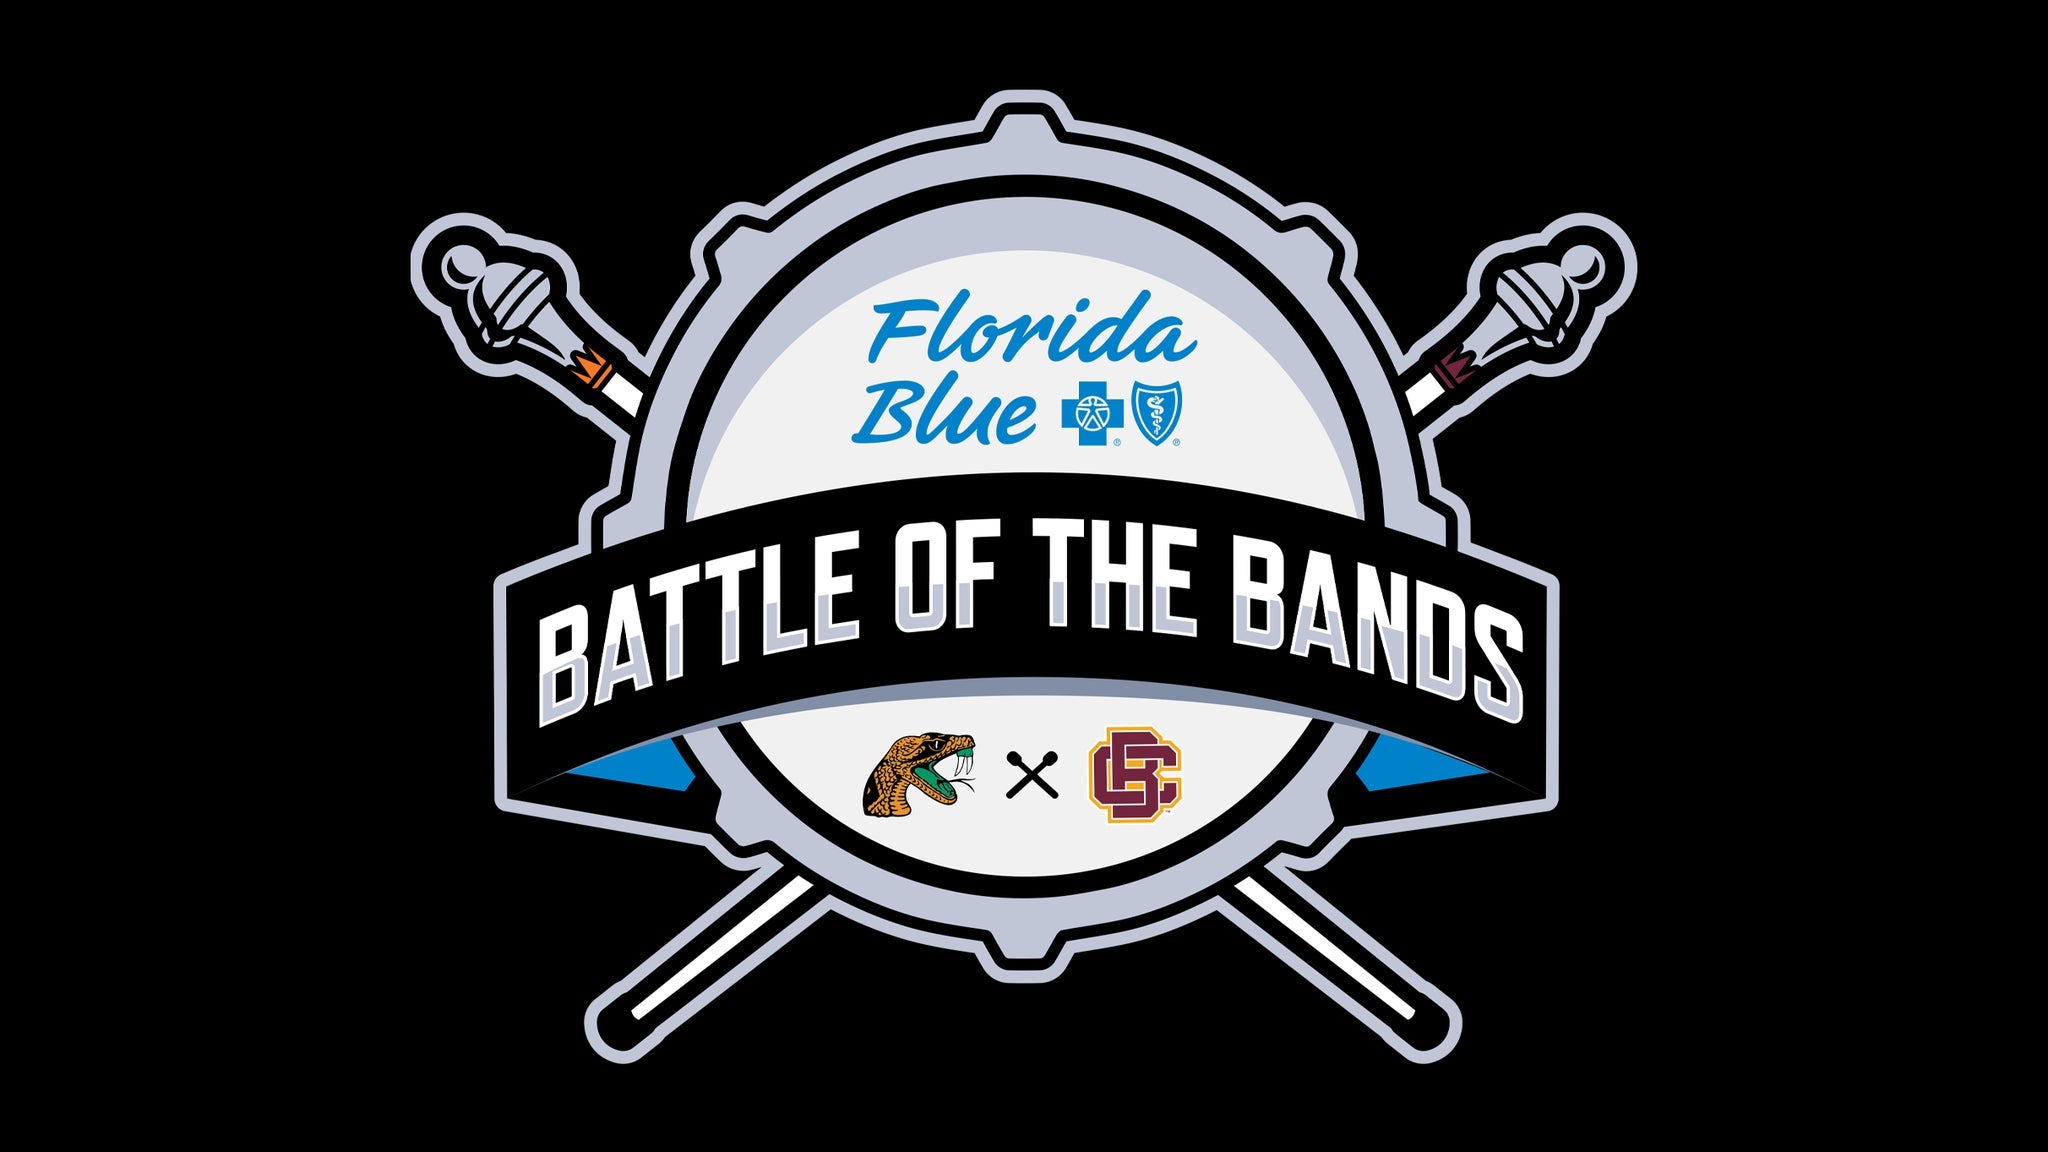 Florida Blue Battle of the Bands pre-sale code for concert tickets in Orlando, FL (Amway Center)